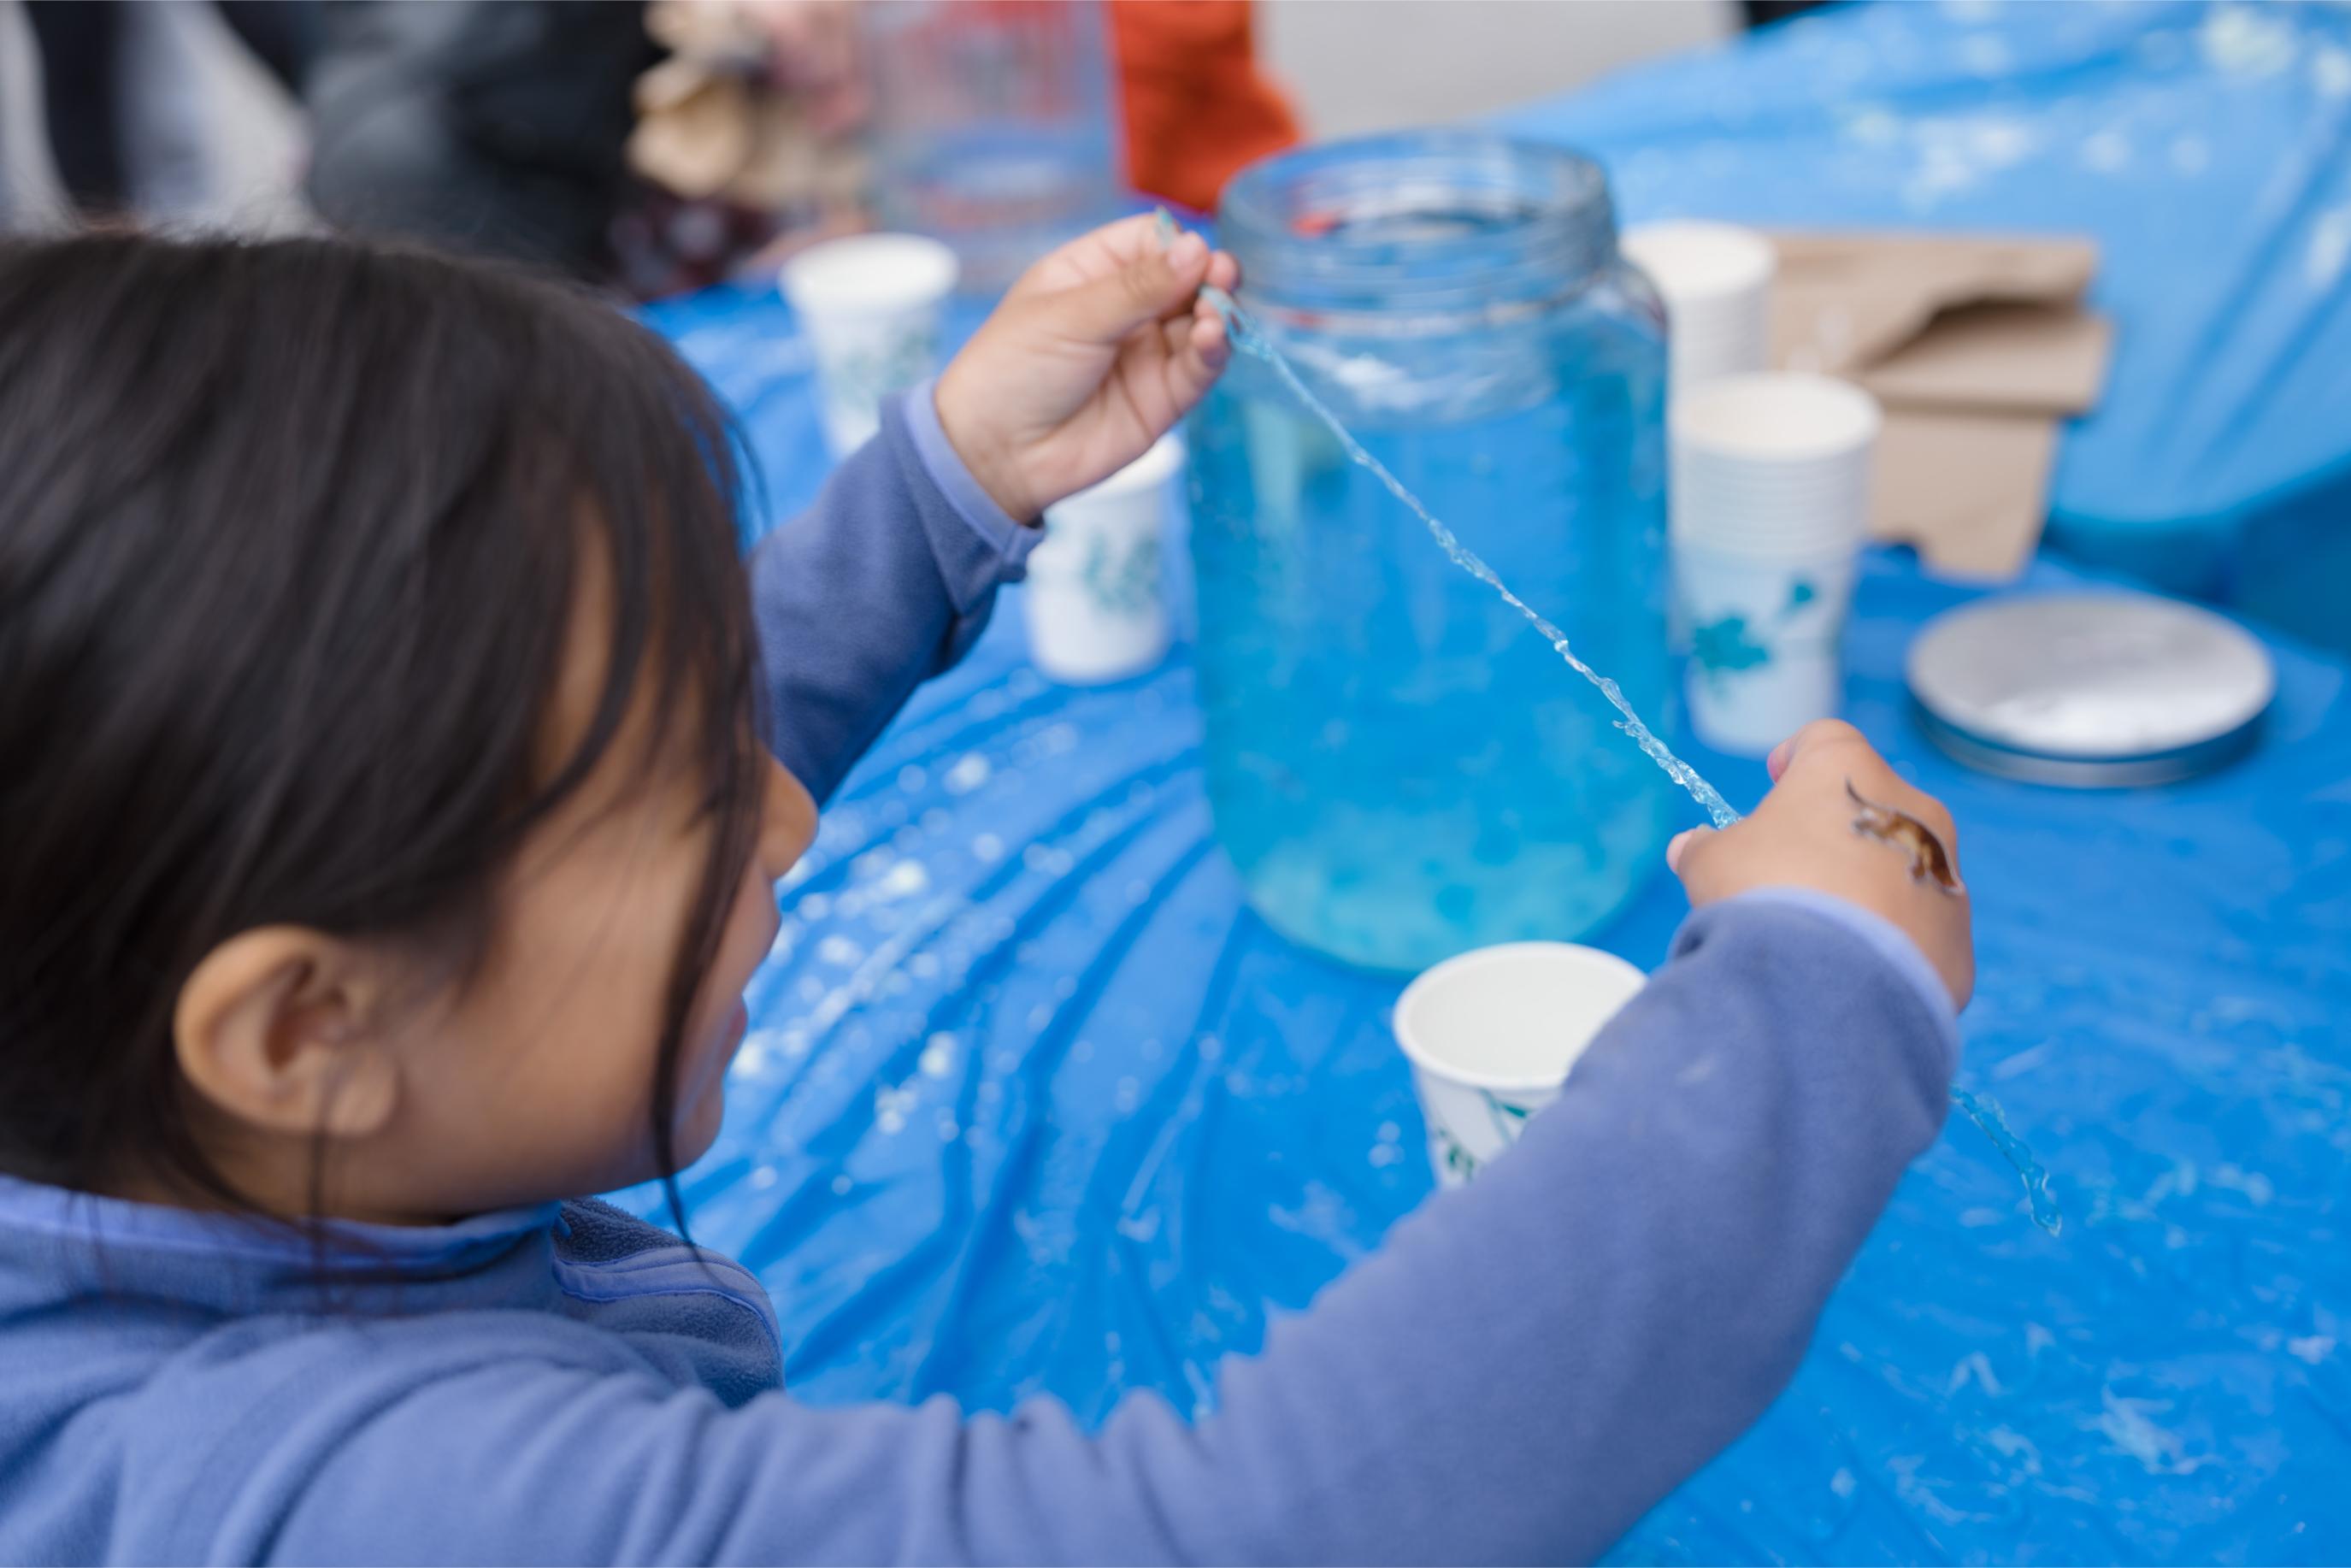 A child is playing with a light blue gel-like substance at the Food Science Now Booth.